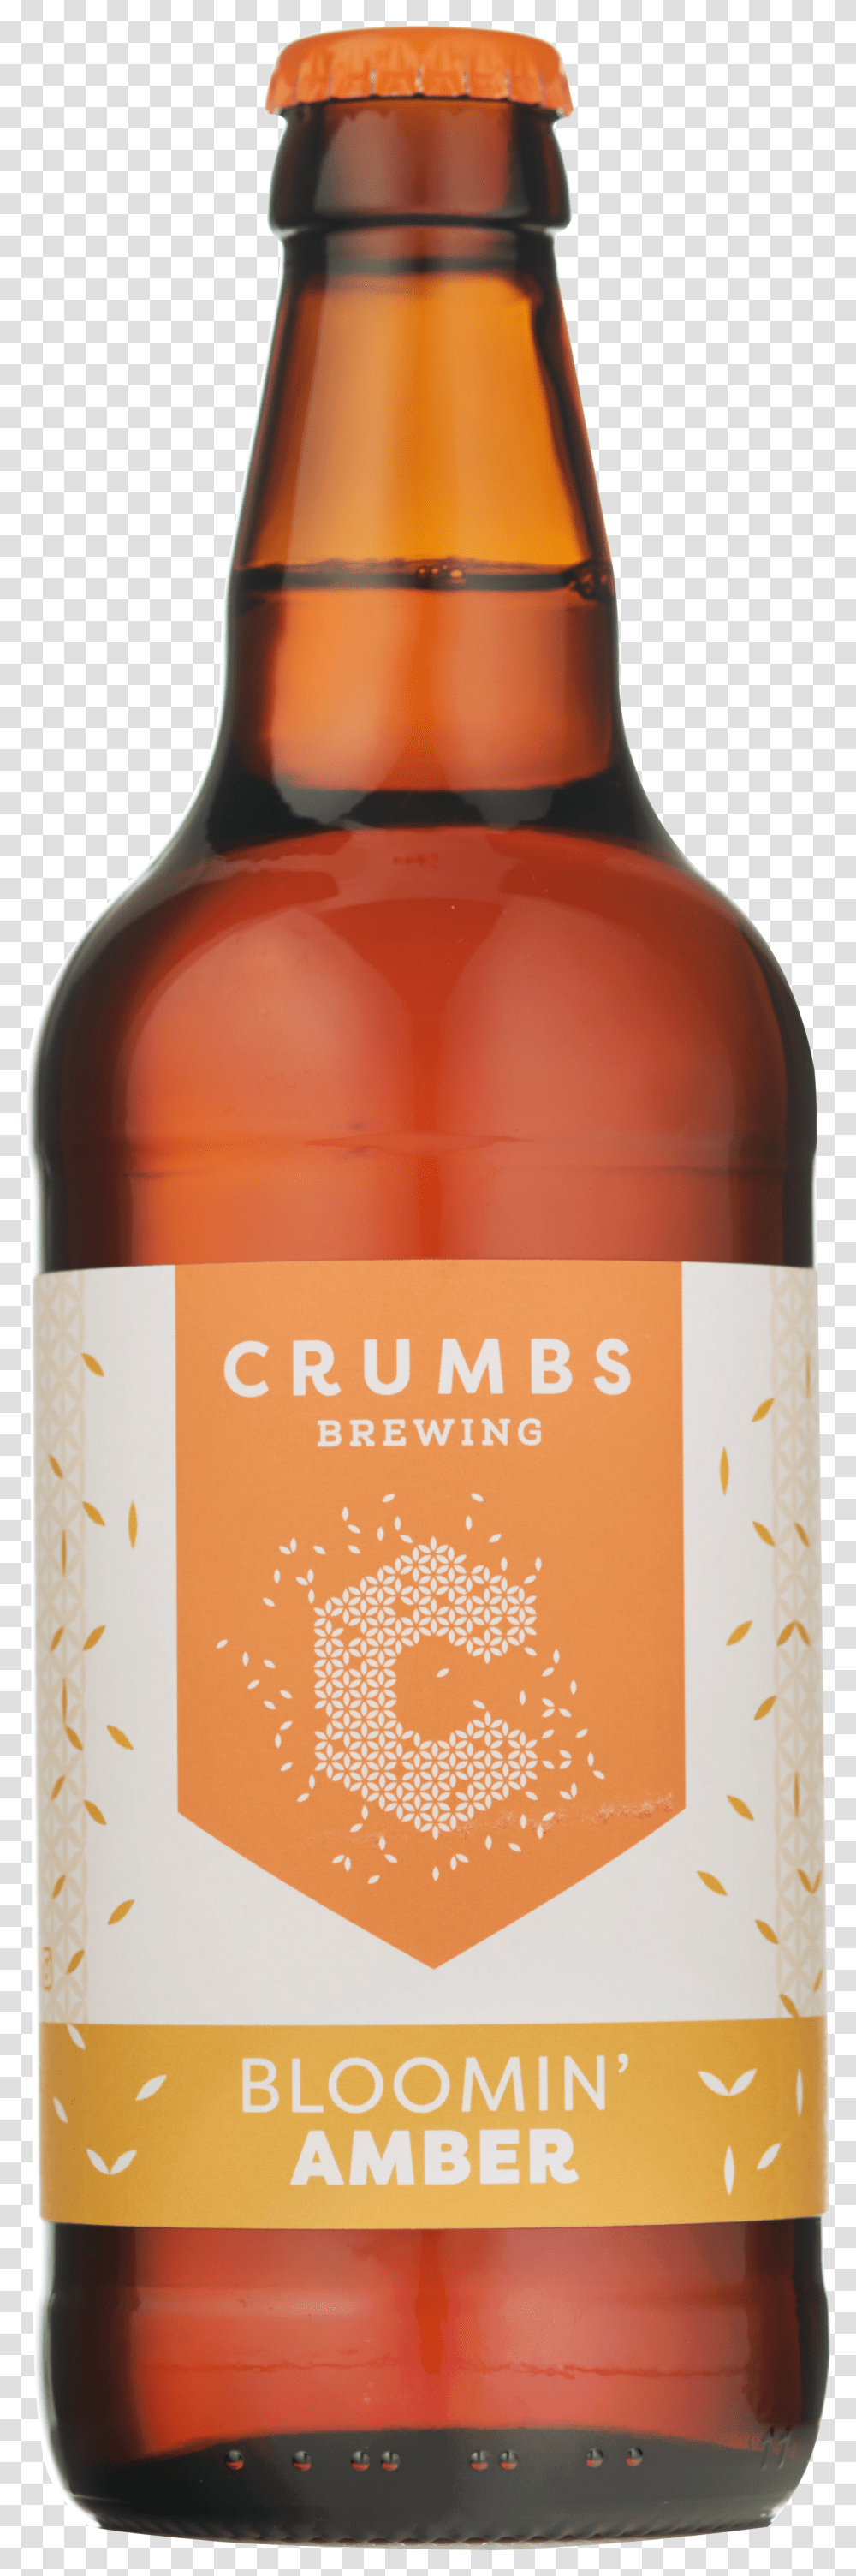 Amber Lager Crumbs Brewery Surrey EnglandClass Glass Bottle Transparent Png